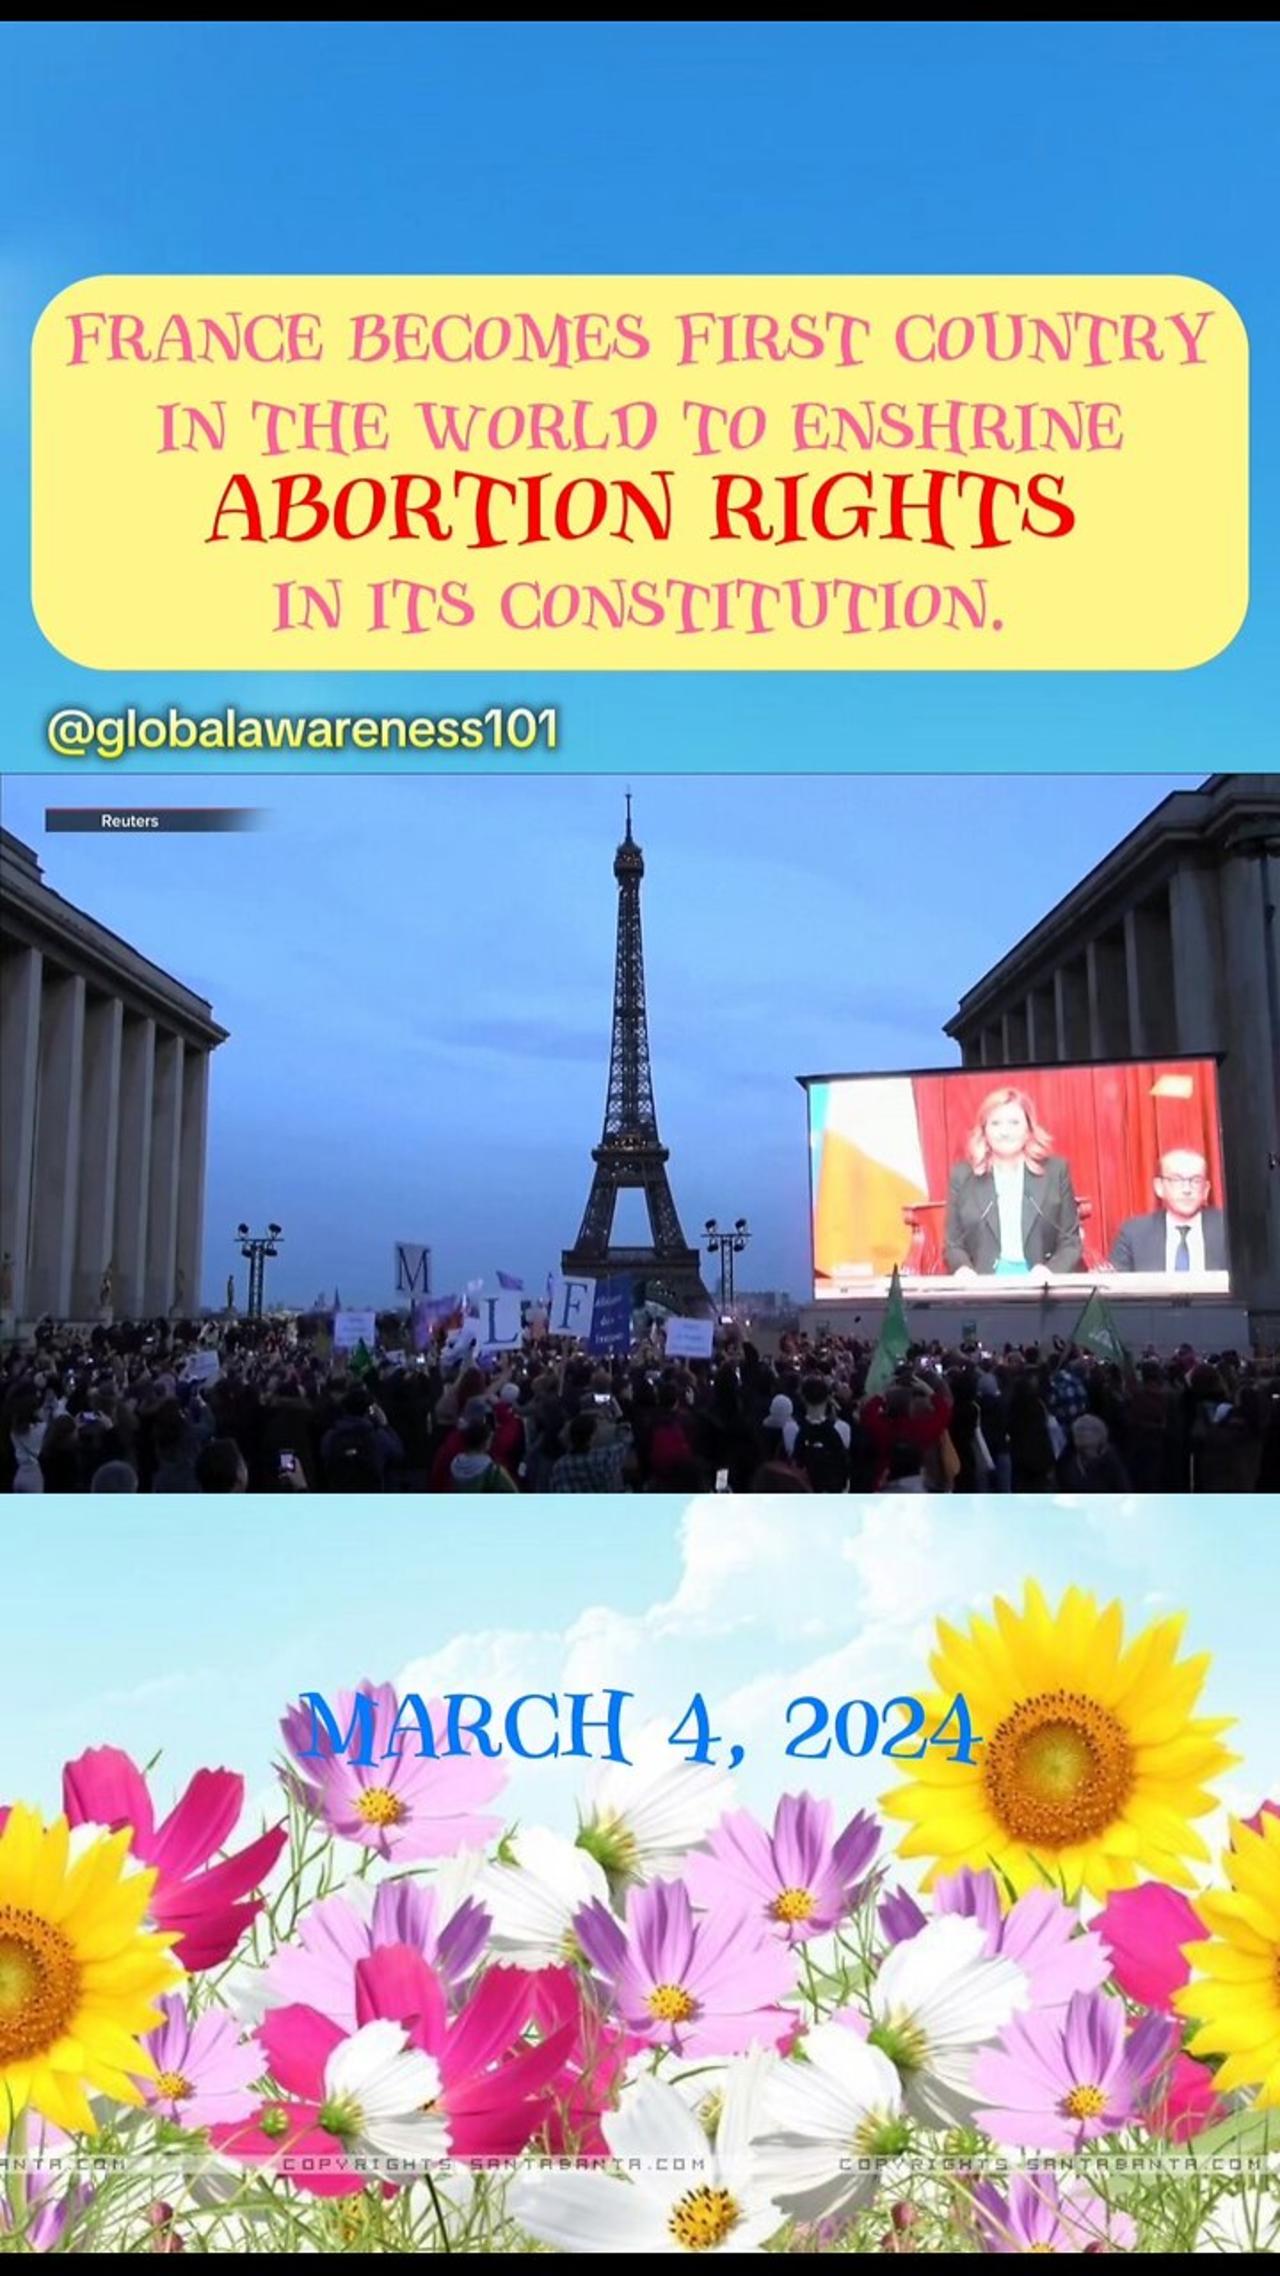 France Becomes First Country To Enshrine Abortion Rights To Its Constitution